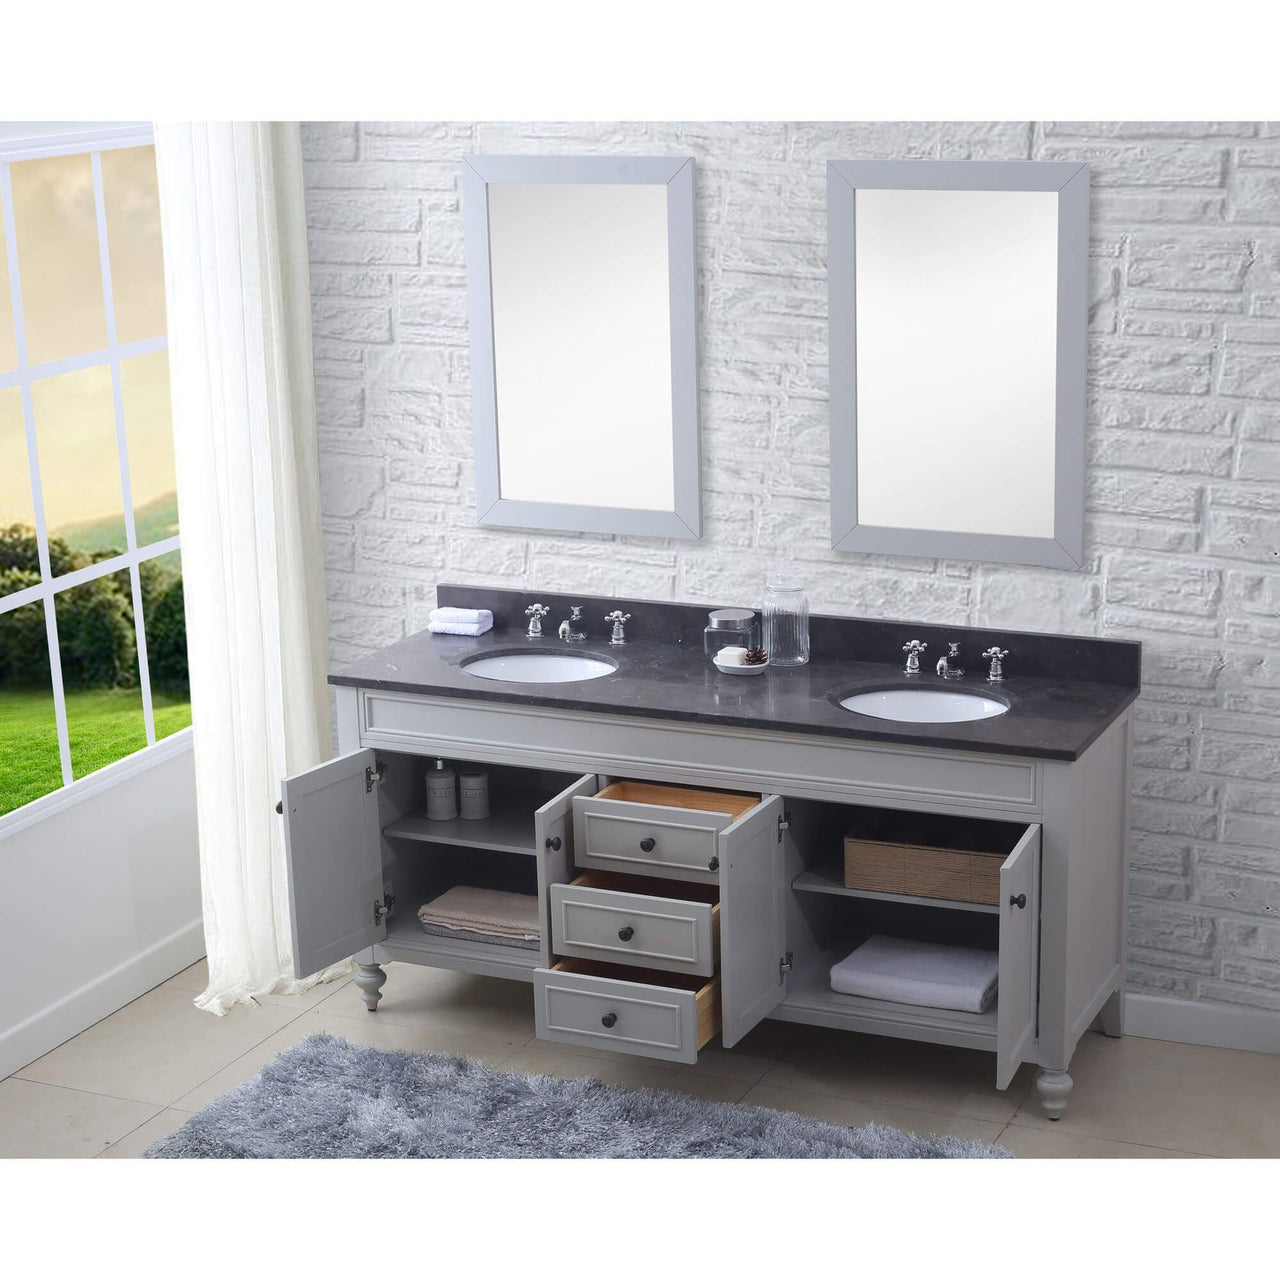 POTENZA 60" Earl Grey Double Sink Bathroom Vanity With 2 Matching Framed Mirrors Vanity Water Creation 